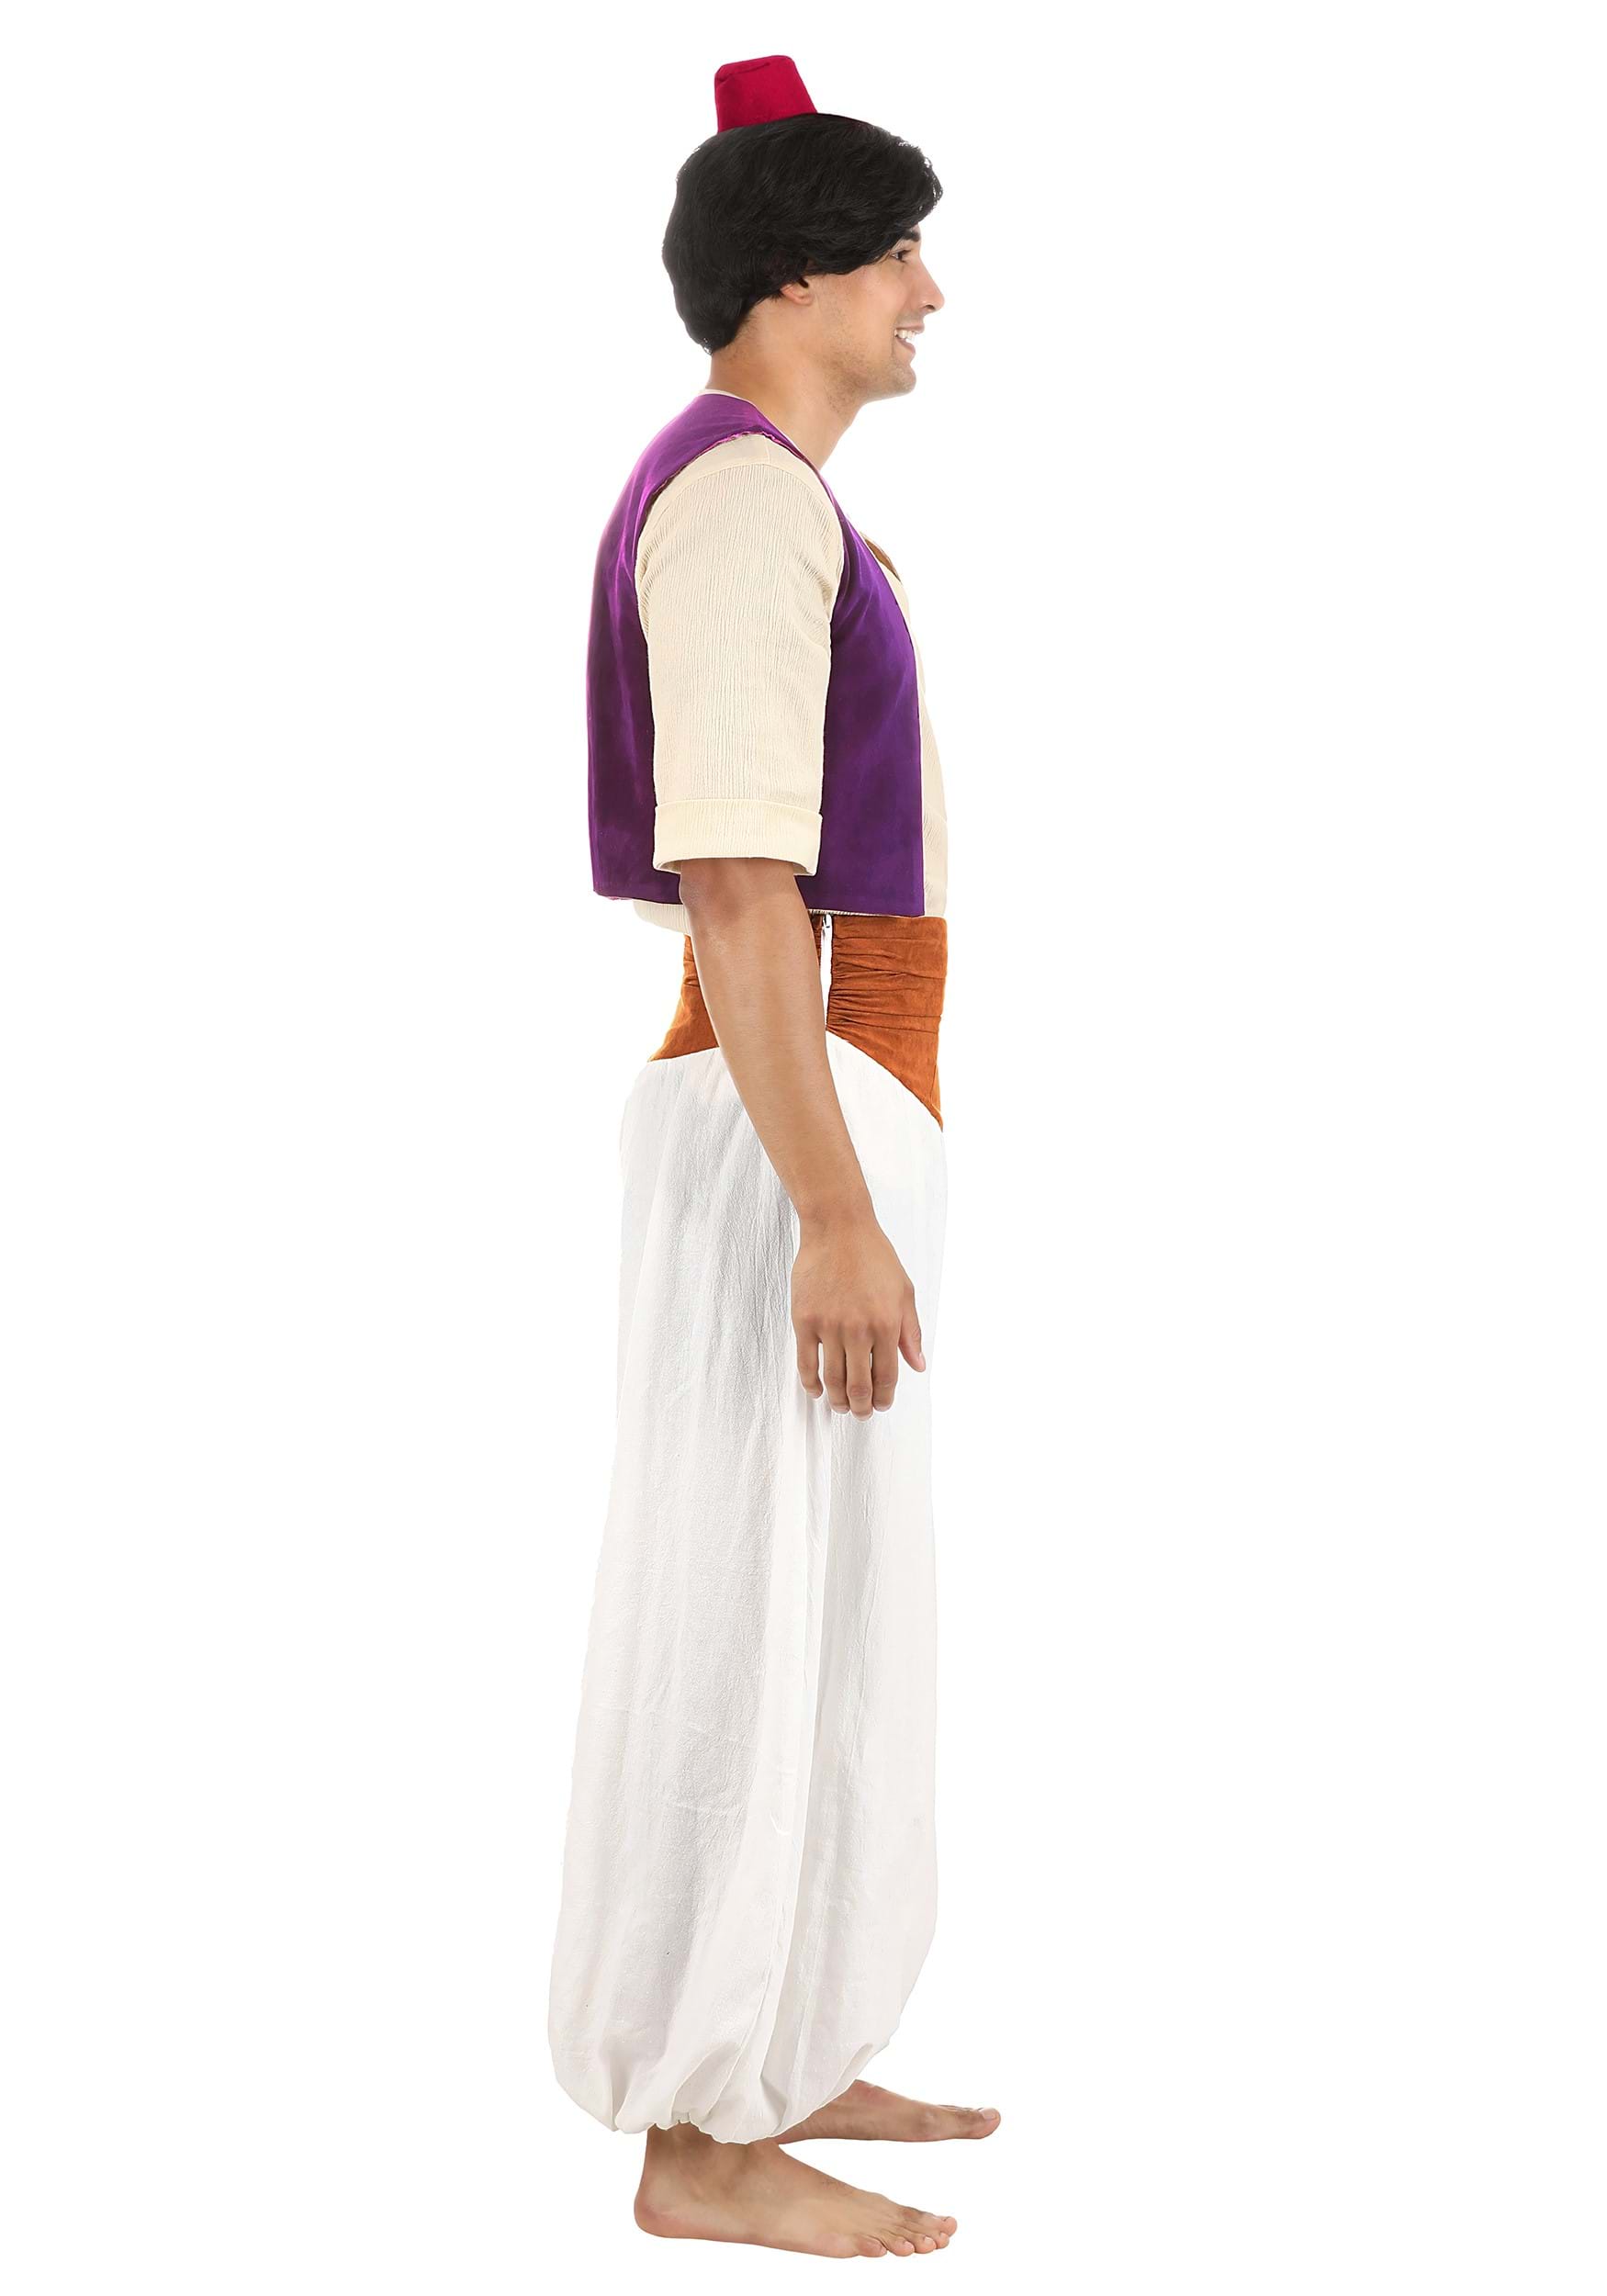  Disney Adult Aladdin Street Rat Costume, Disney's Aladdin  Street Clothes Costume for Men, Halloween Costume and Cosplay Outfit Large  : Clothing, Shoes & Jewelry